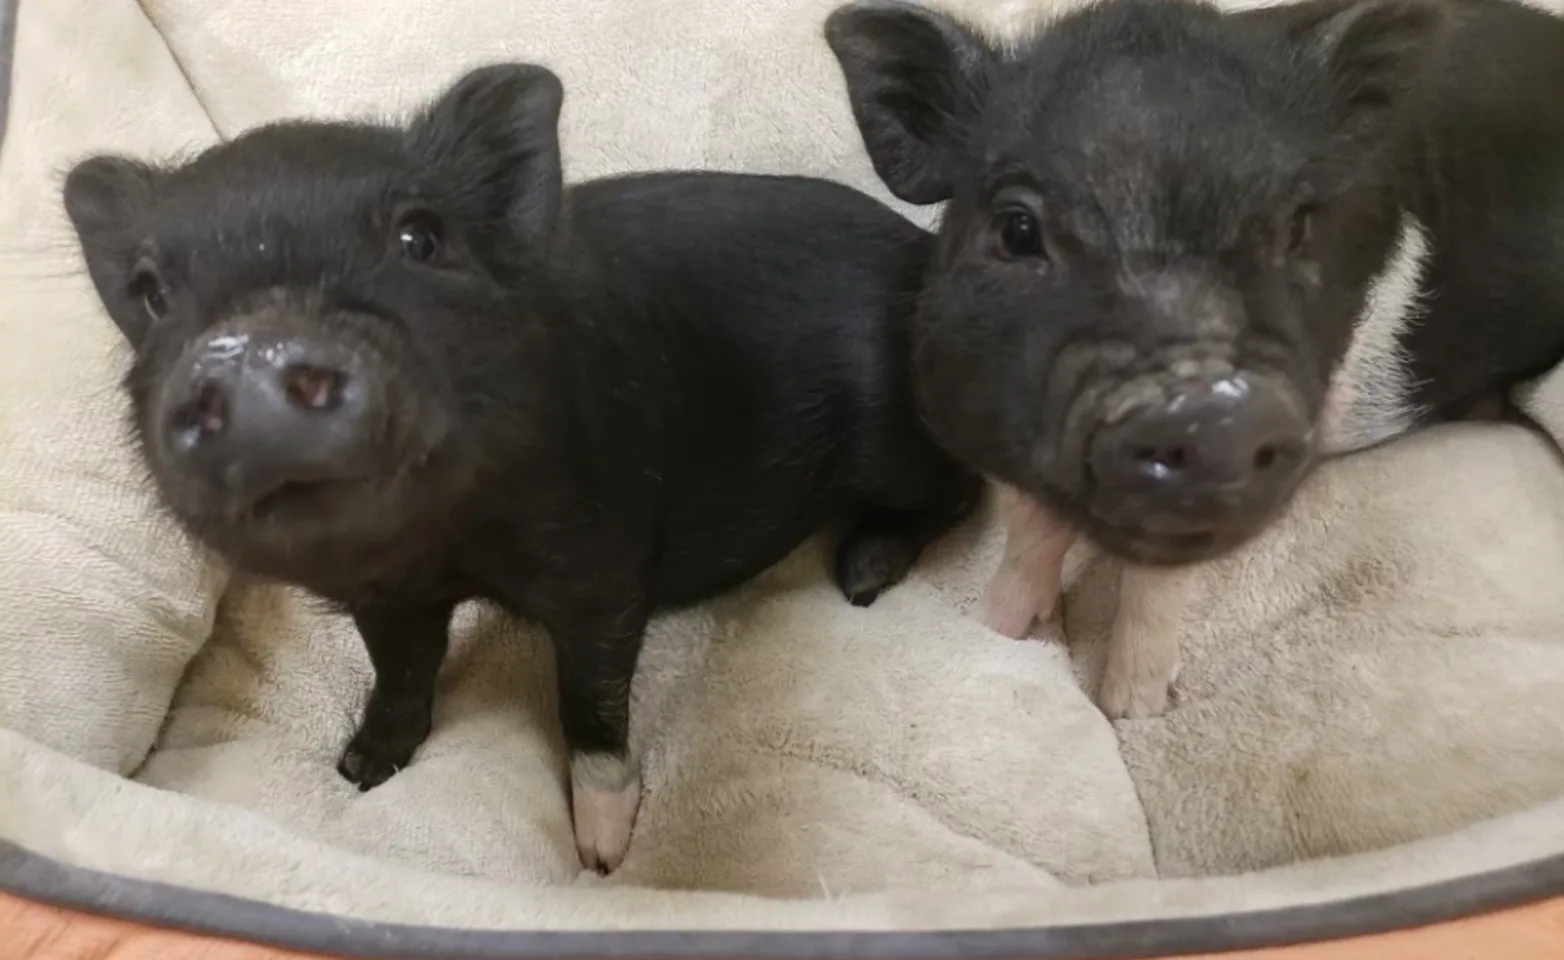 Two B&W piglets on a dog bed